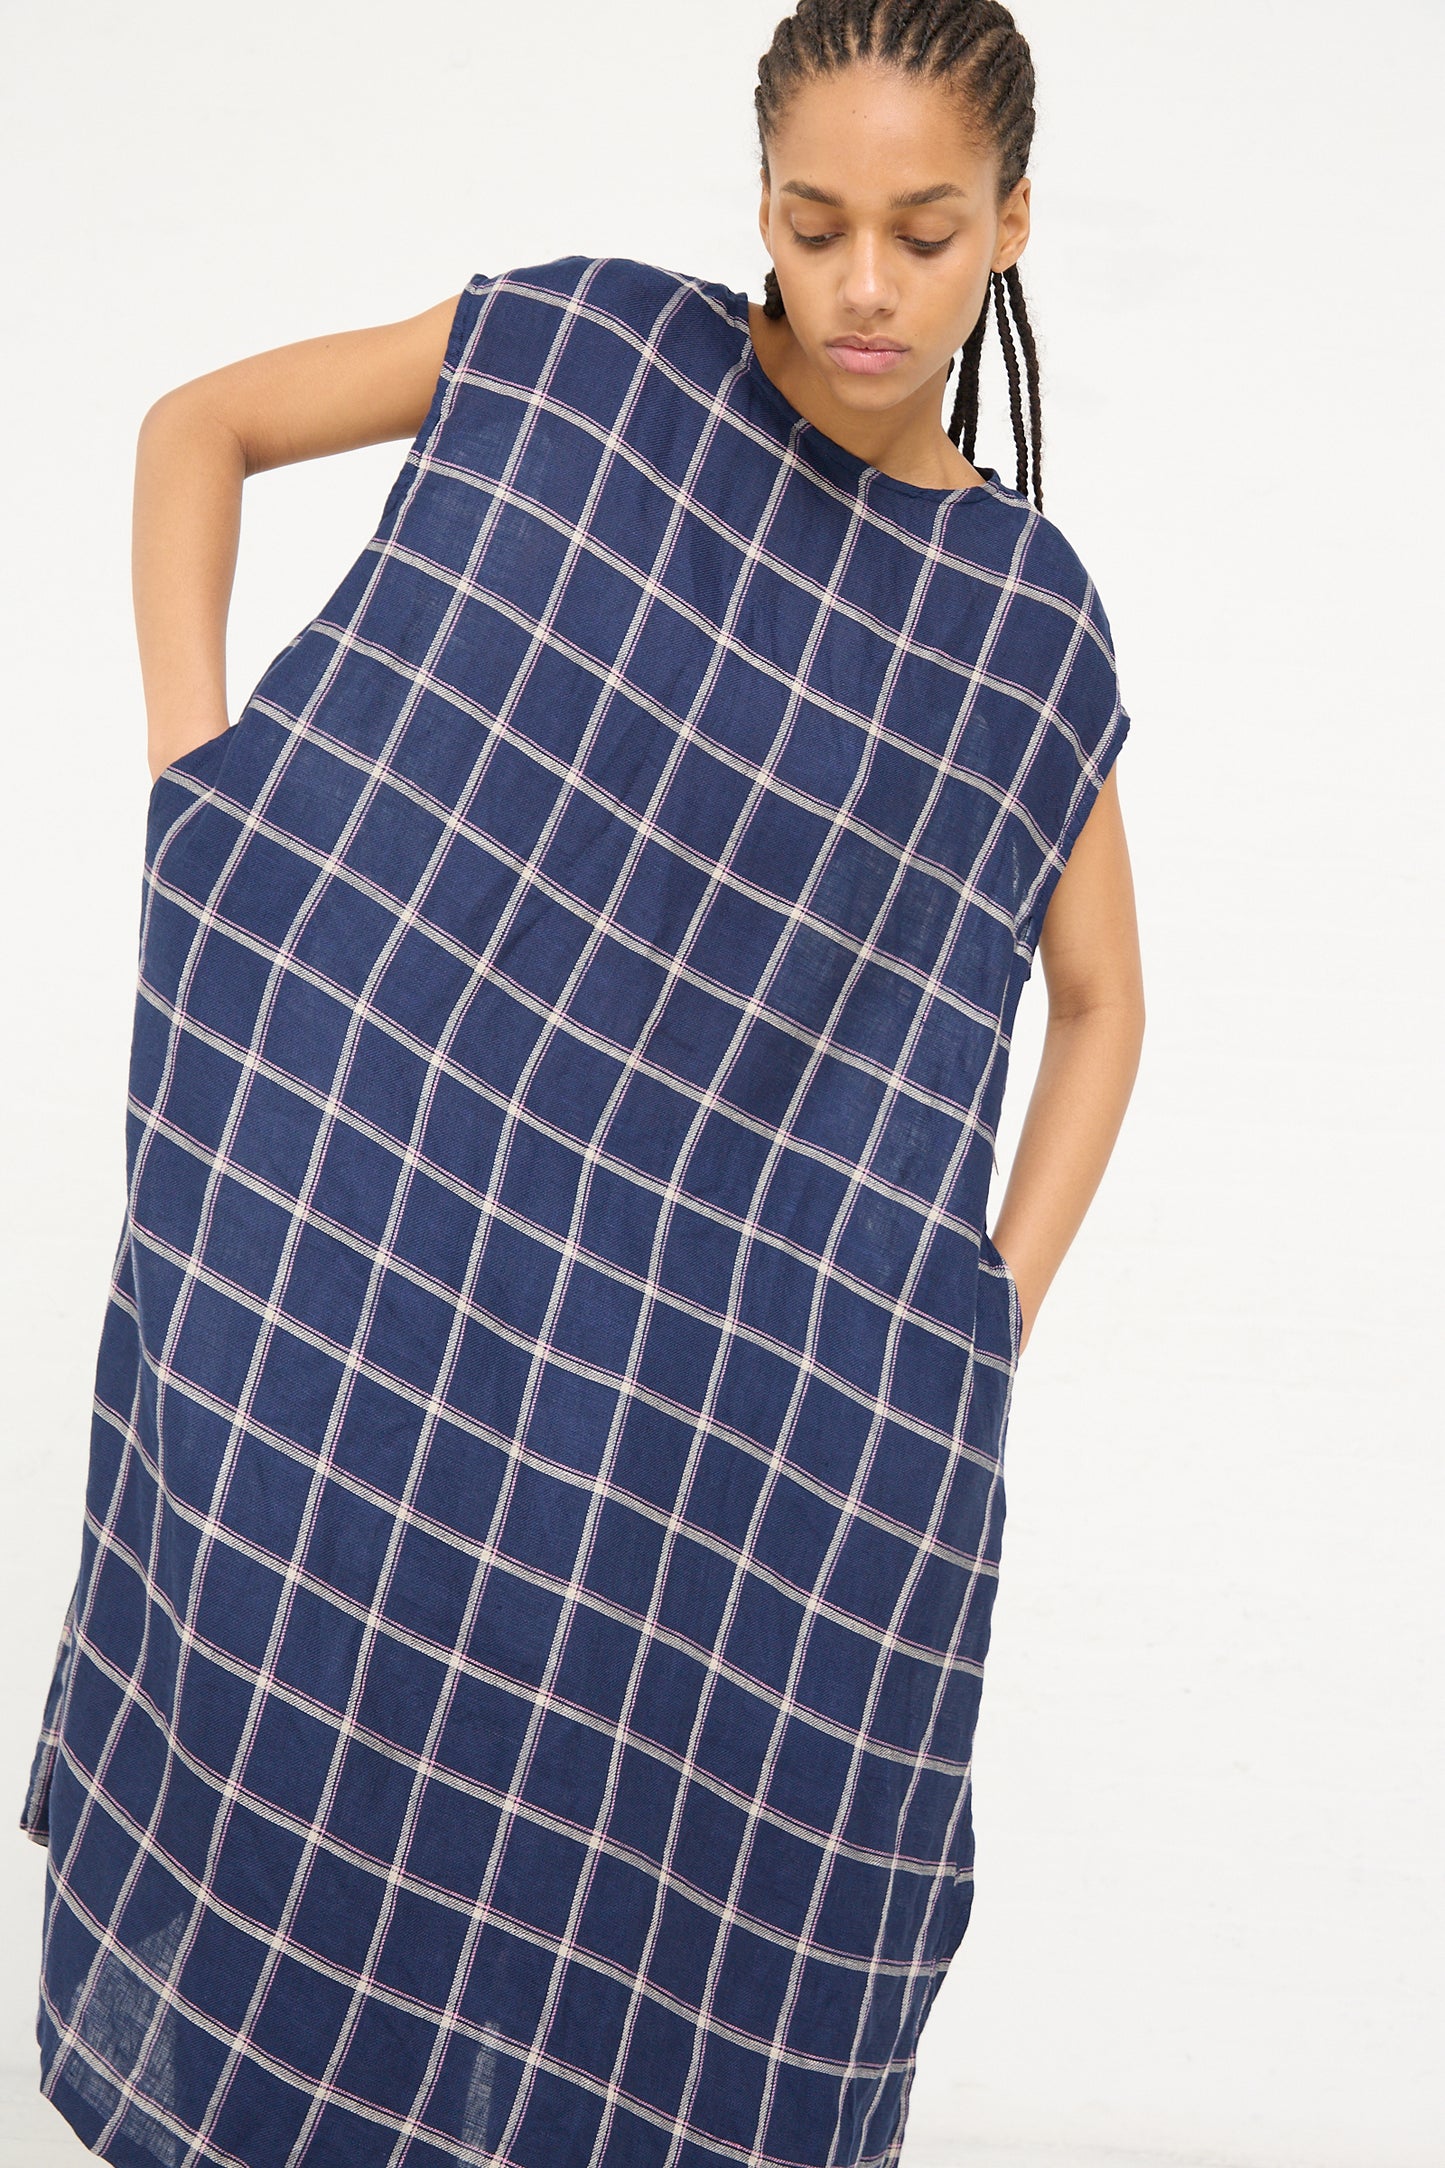 A woman in a Linen Check Dress in Navy by Ichi Antiquités posing with her hand on her hip.